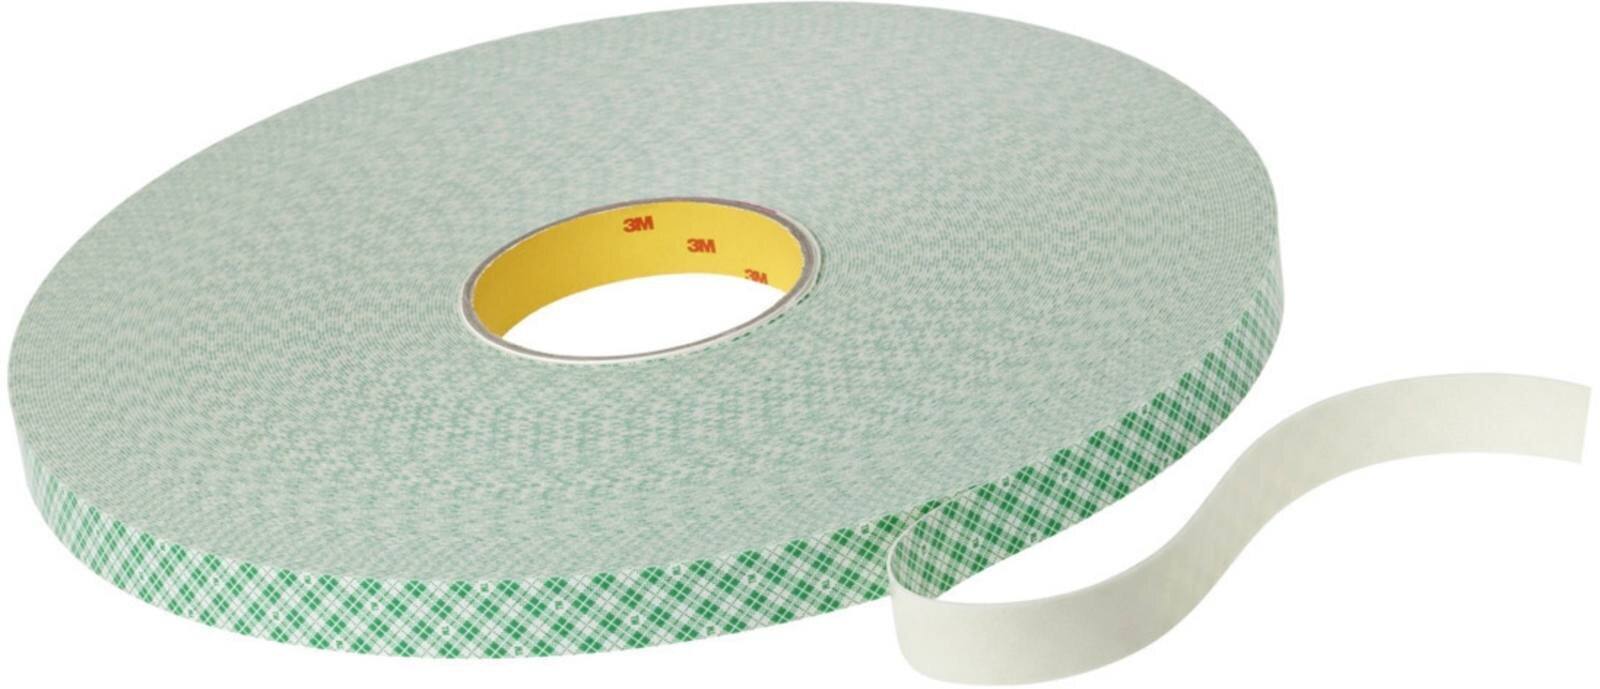 3M PU foam adhesive tape with acrylic adhesive 4032, beige, 38 mm x 66 m, 0.8 mm